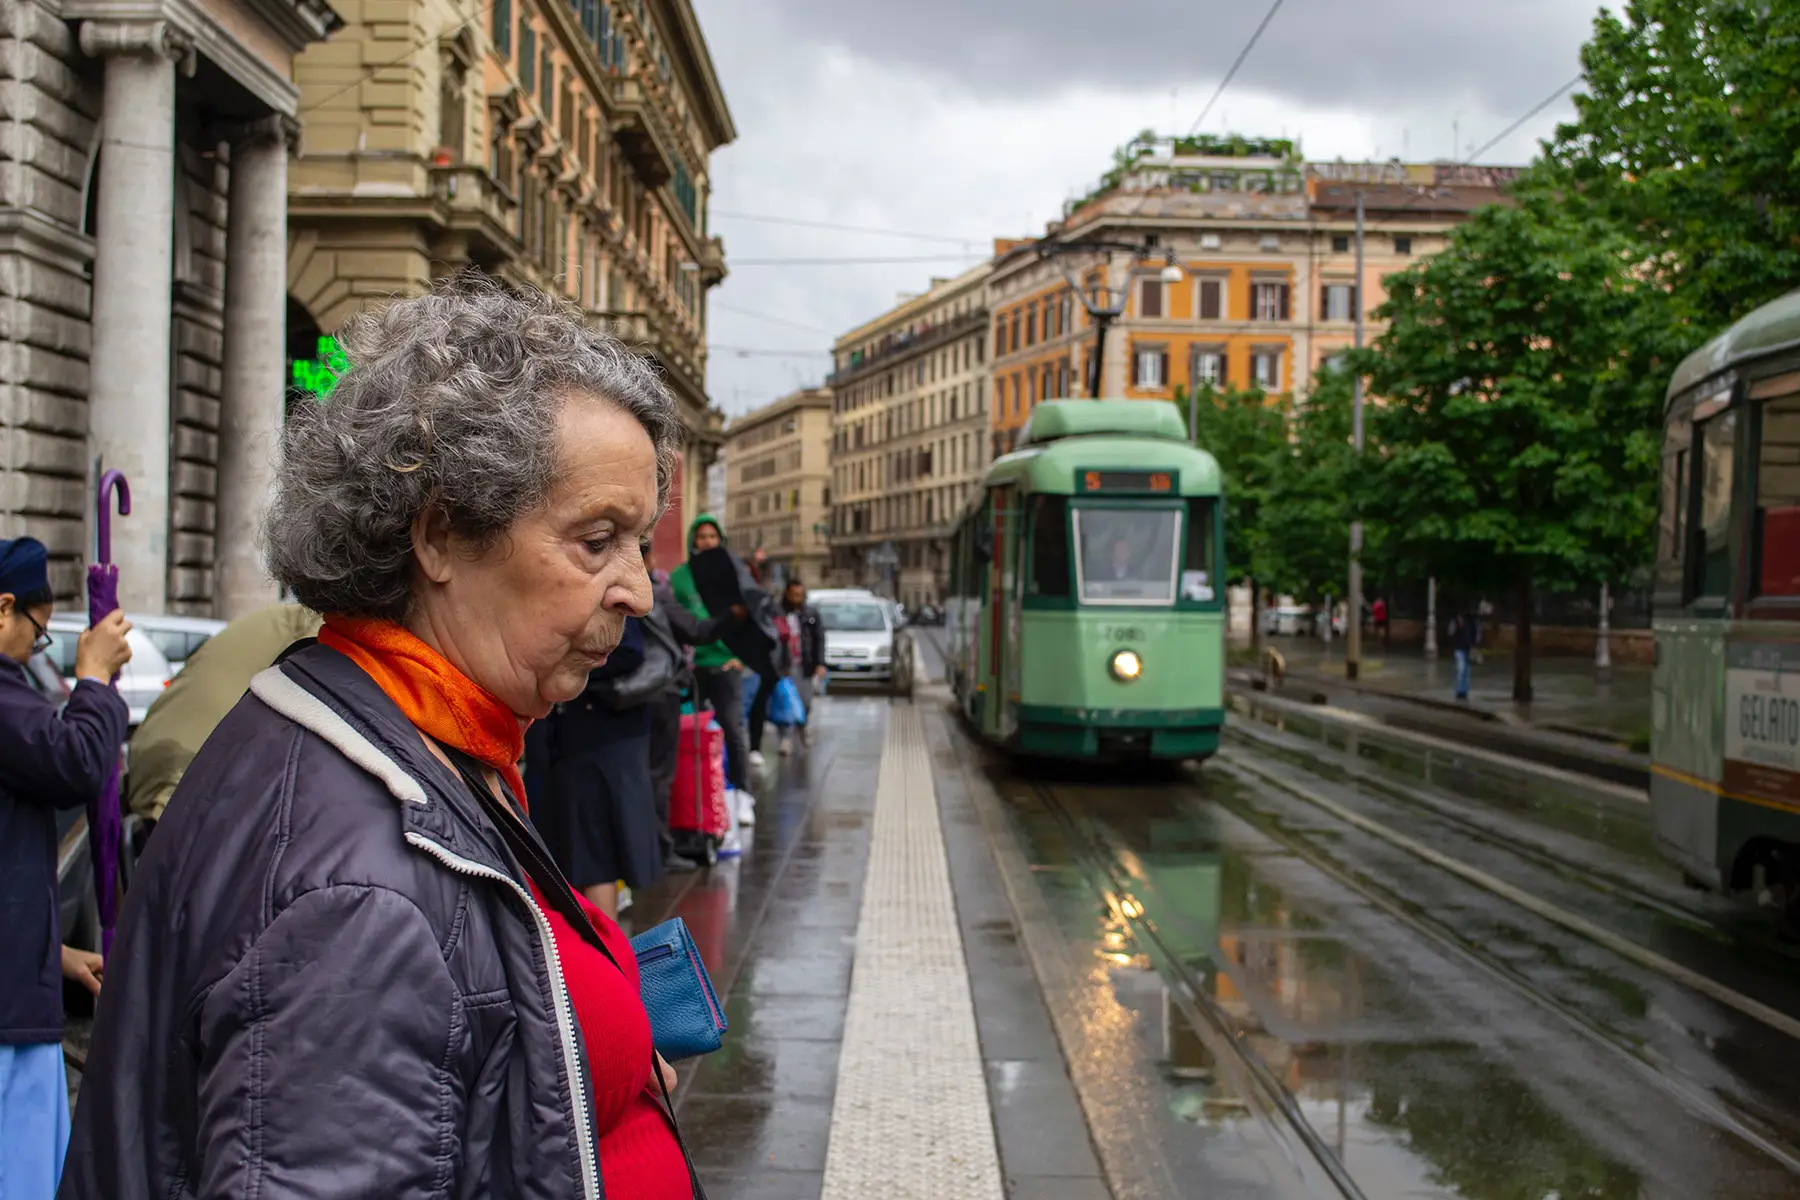 A woman waiting for an old-fashioned green tram on a rainy day.